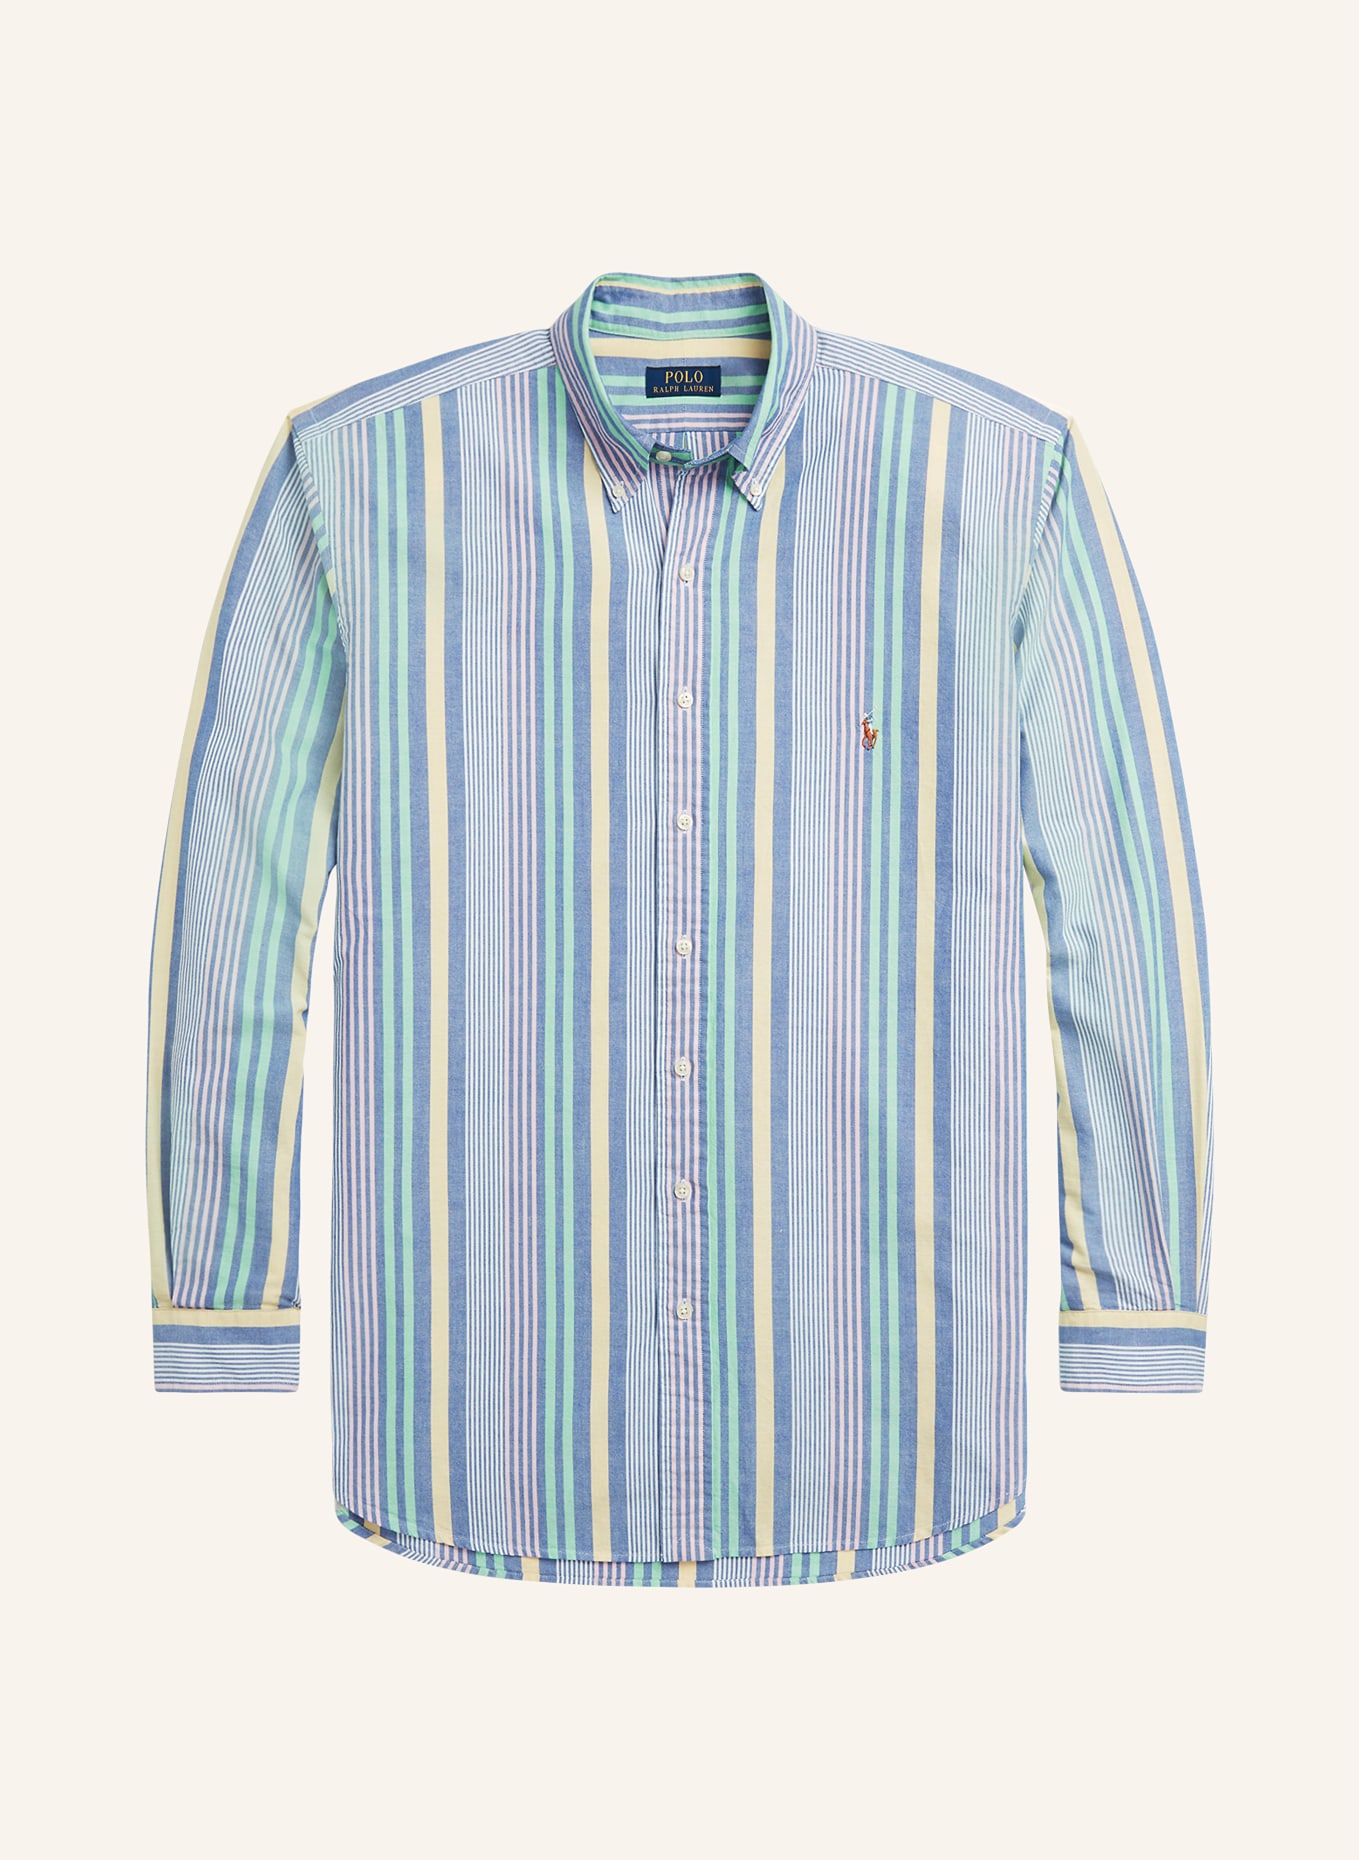 POLO RALPH LAUREN Big & Tall Shirt regular fit, Color: BLUE/ WHITE/ TURQUOISE (Image 1)